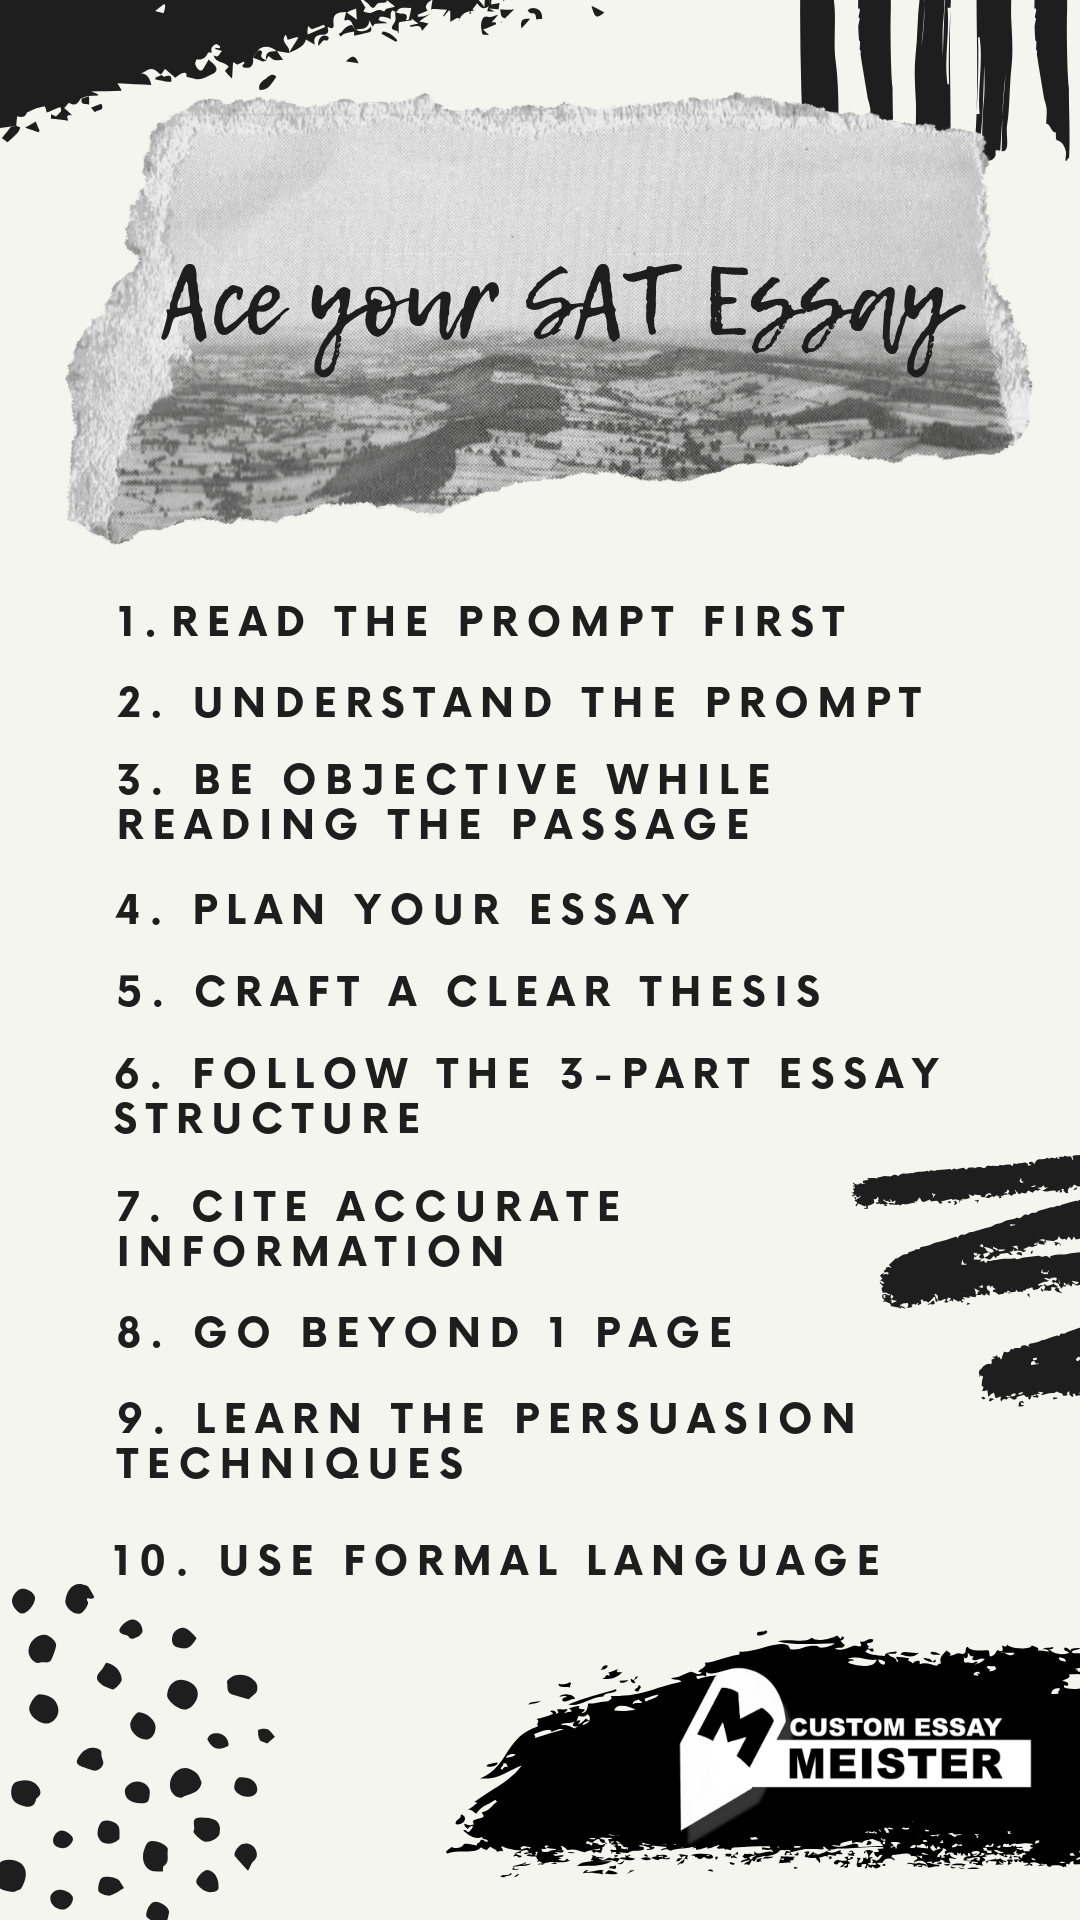 tips for the sat essay